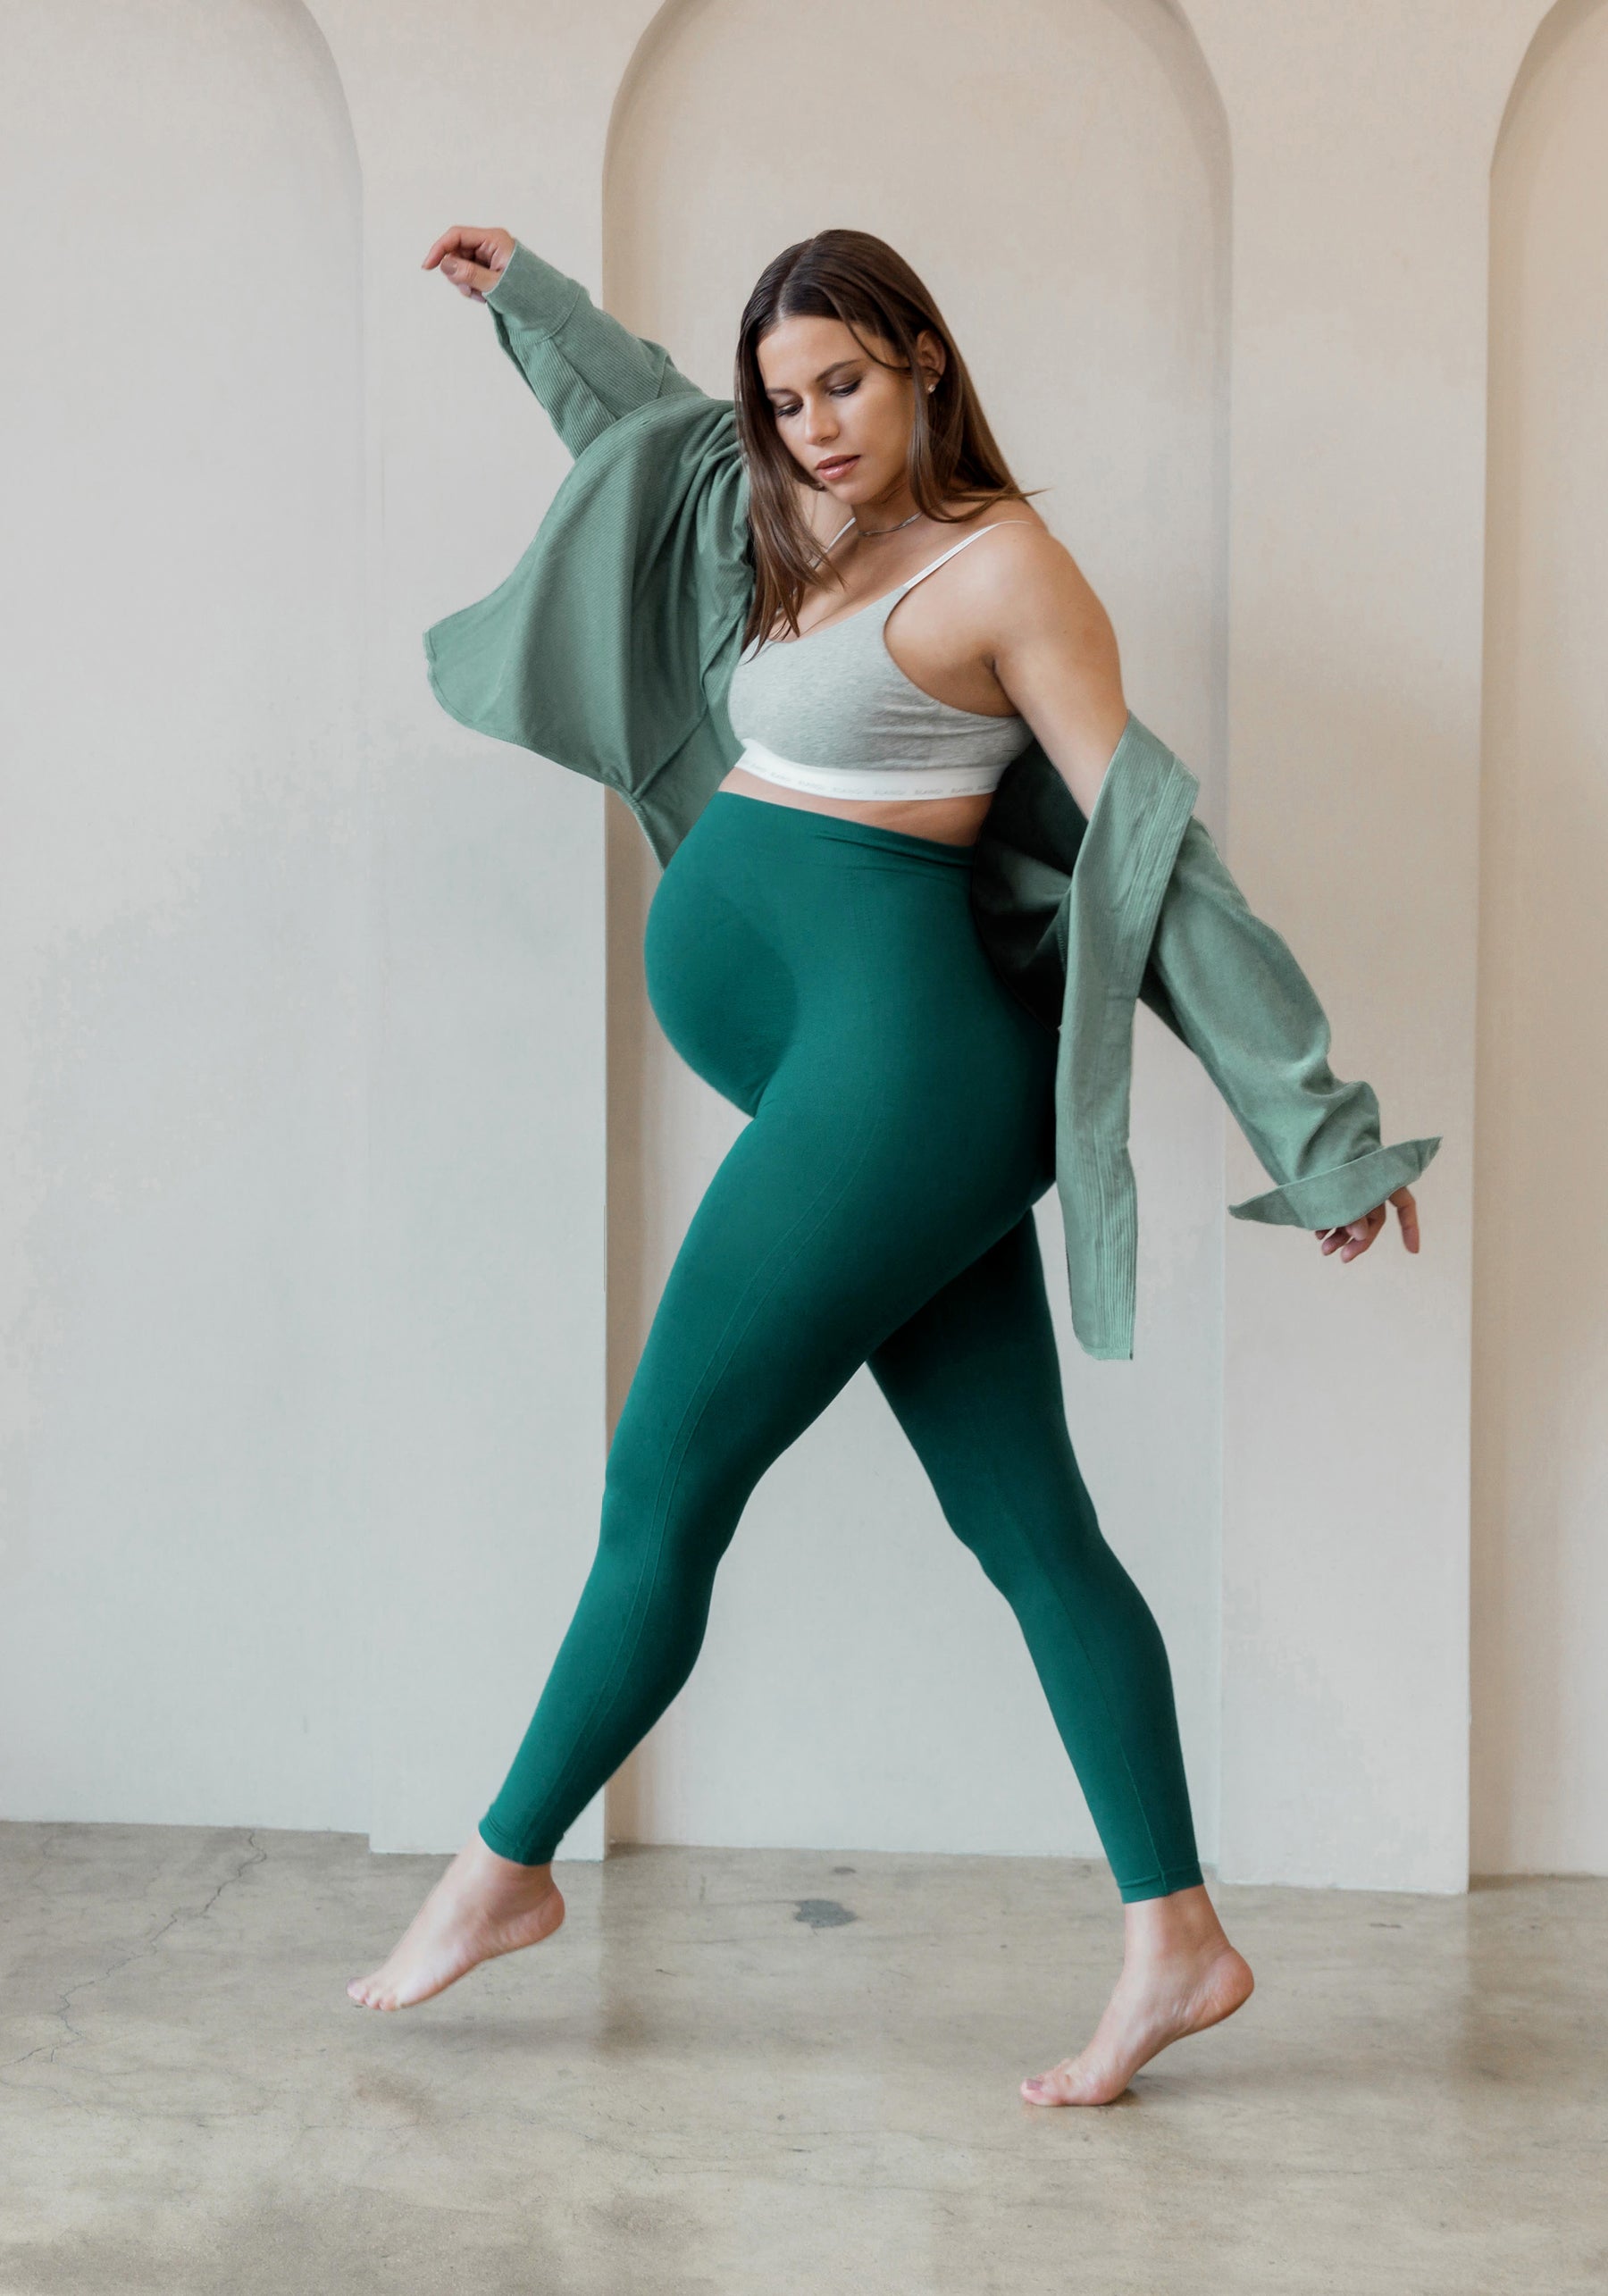 BLANQI - Keepin' things cool, calm and collected in the Wire-Free Bust  Support Nursing Bra in Bone and the Highwaist Leggings in Black. You can't  go past a classic color combo!